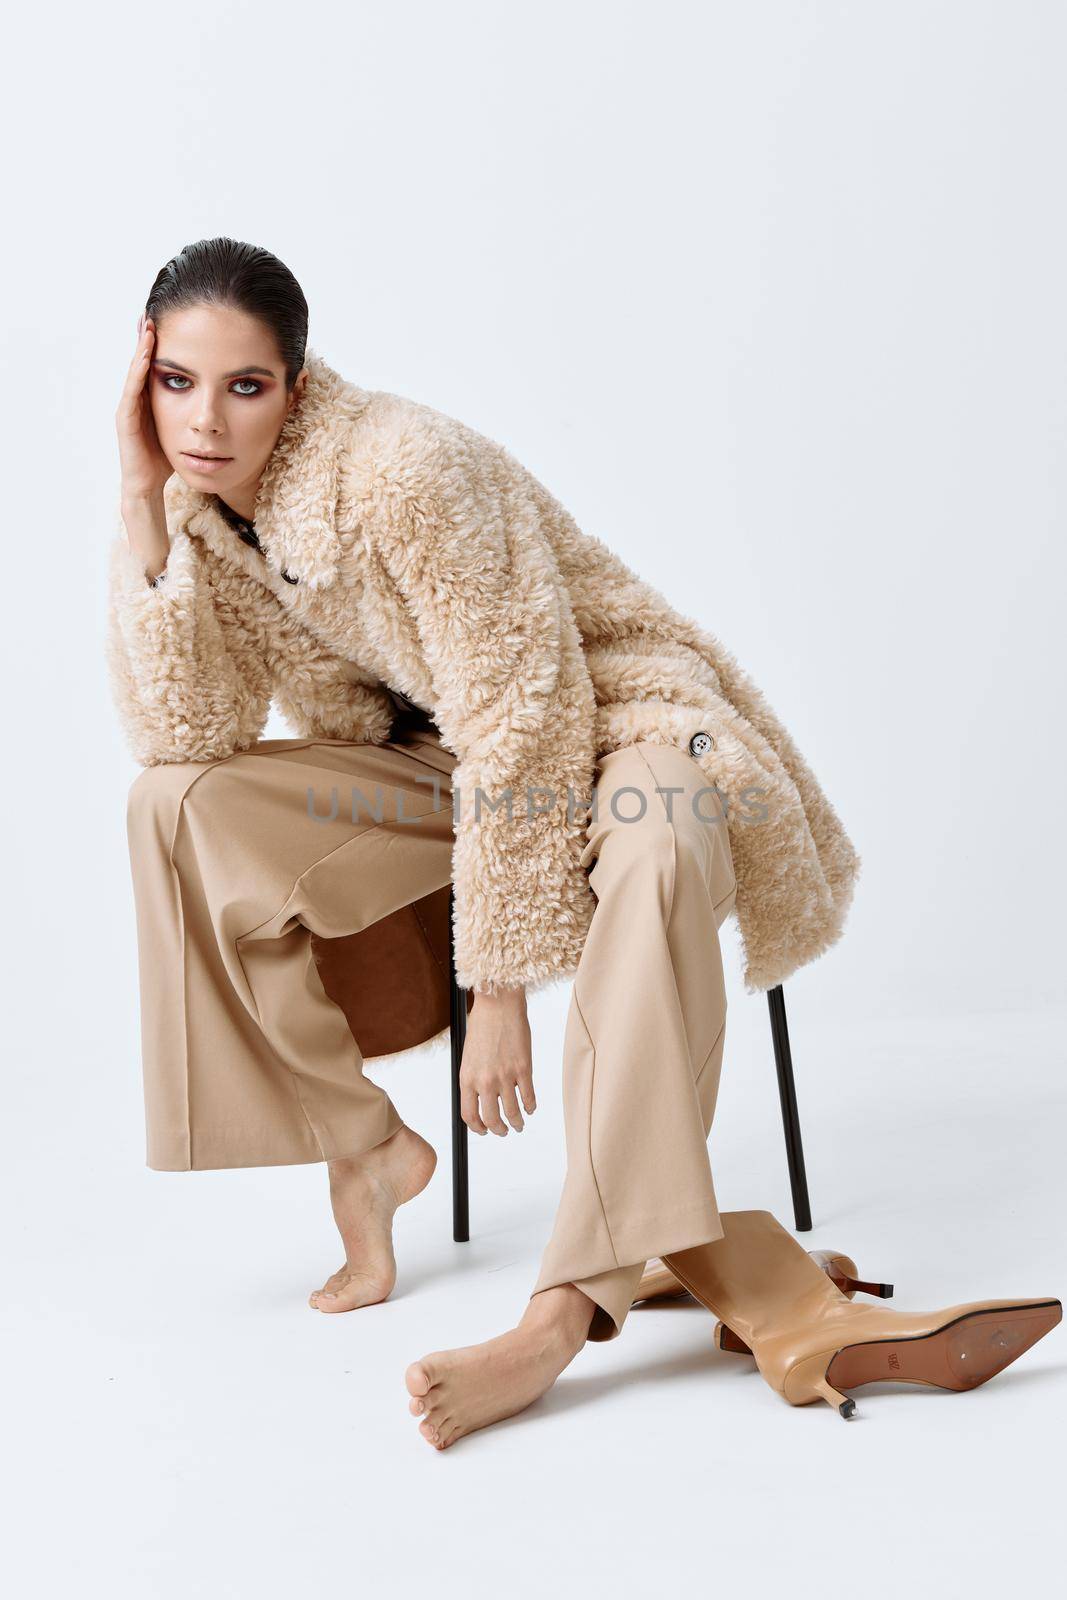 brunette with bright makeup on her face beige coat fashionable clothes barefoot sitting on a chair. High quality photo